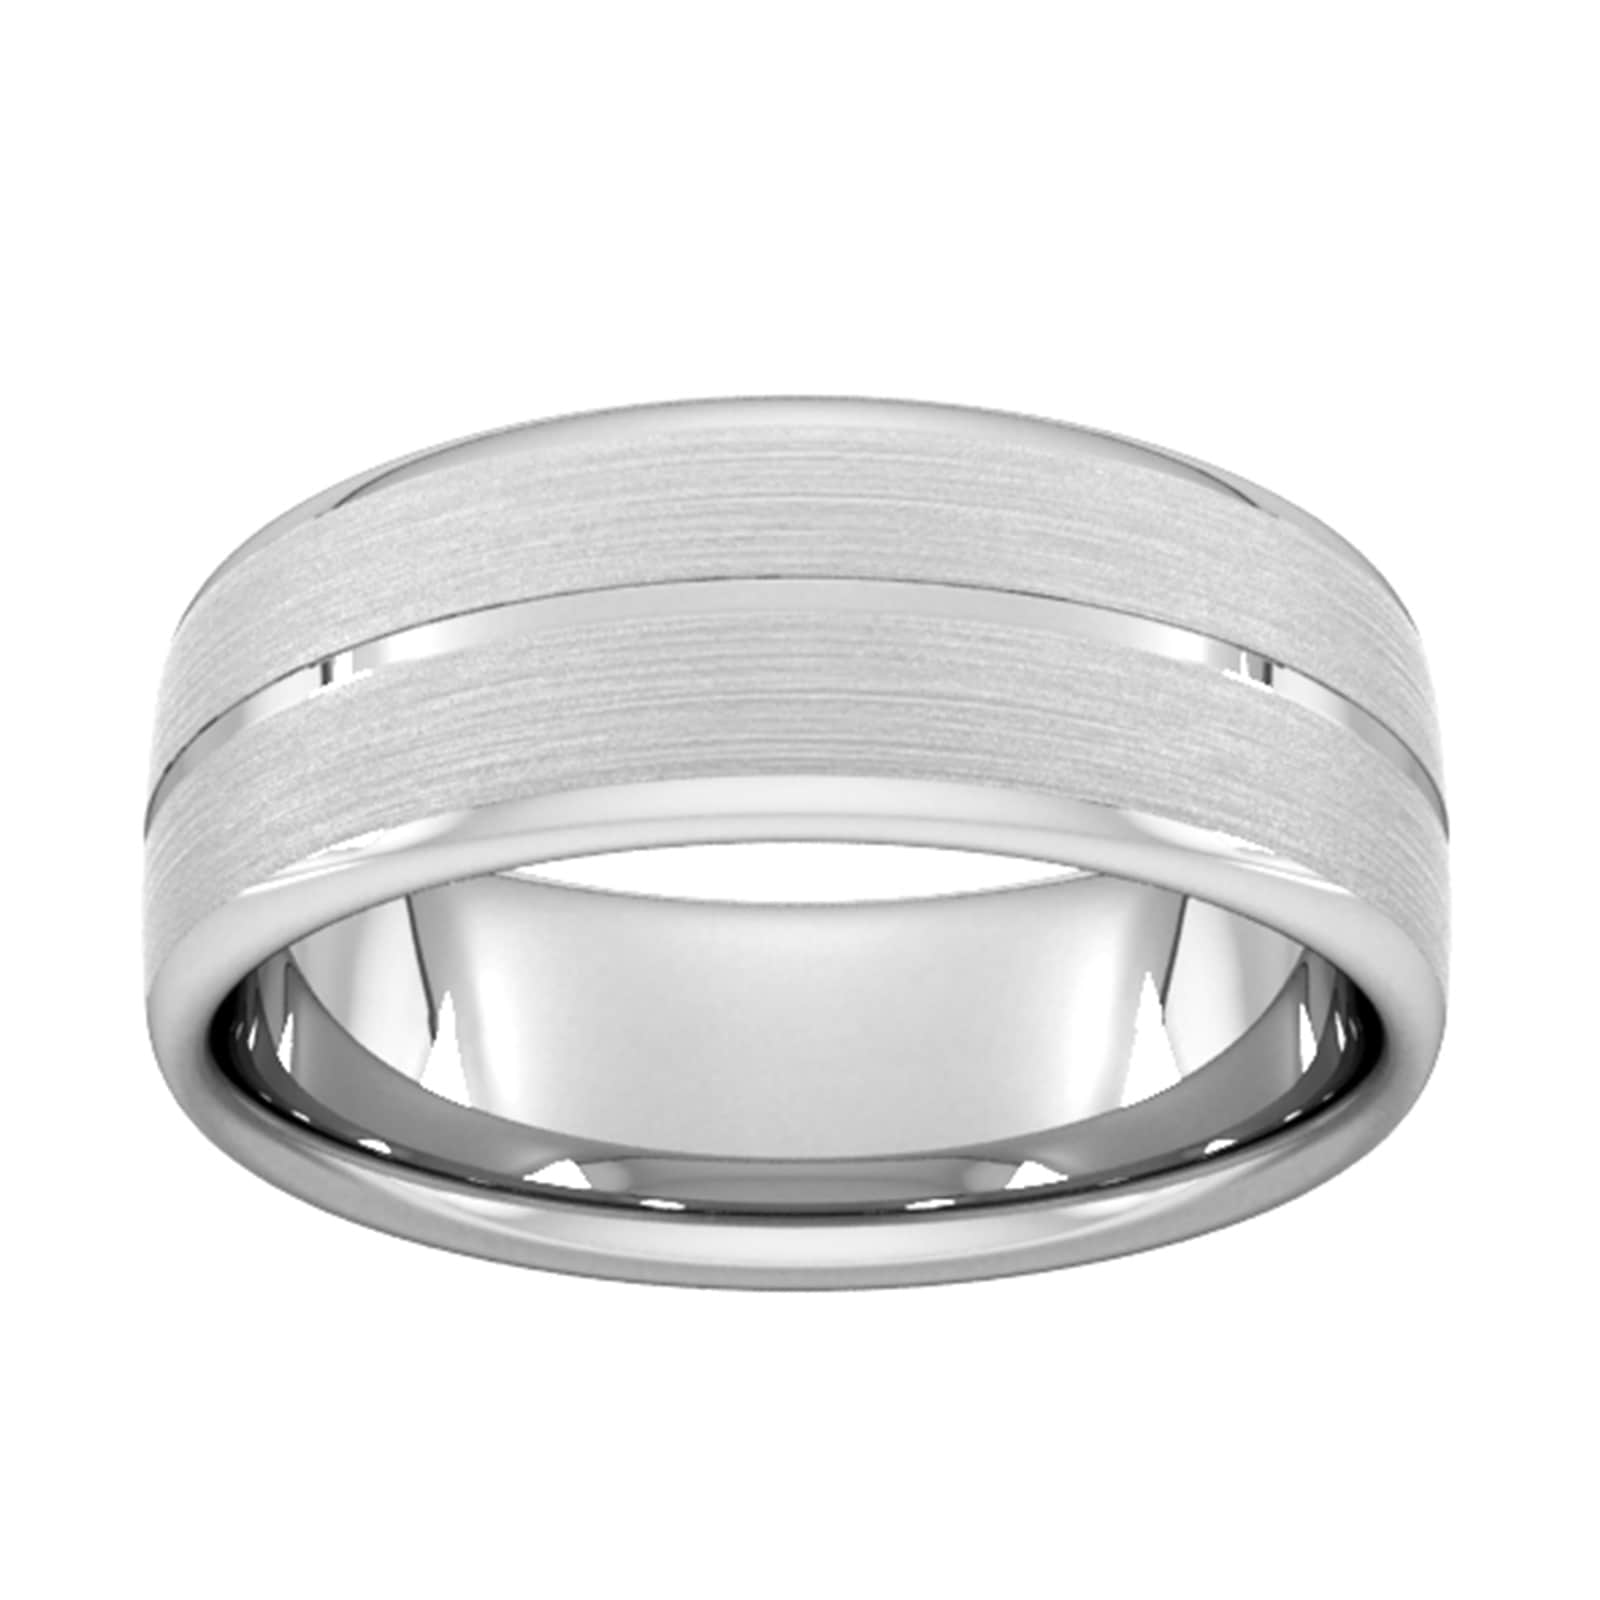 8mm Flat Court Heavy Centre Groove With Chamfered Edge Wedding Ring In 9 Carat White Gold - Ring Size H